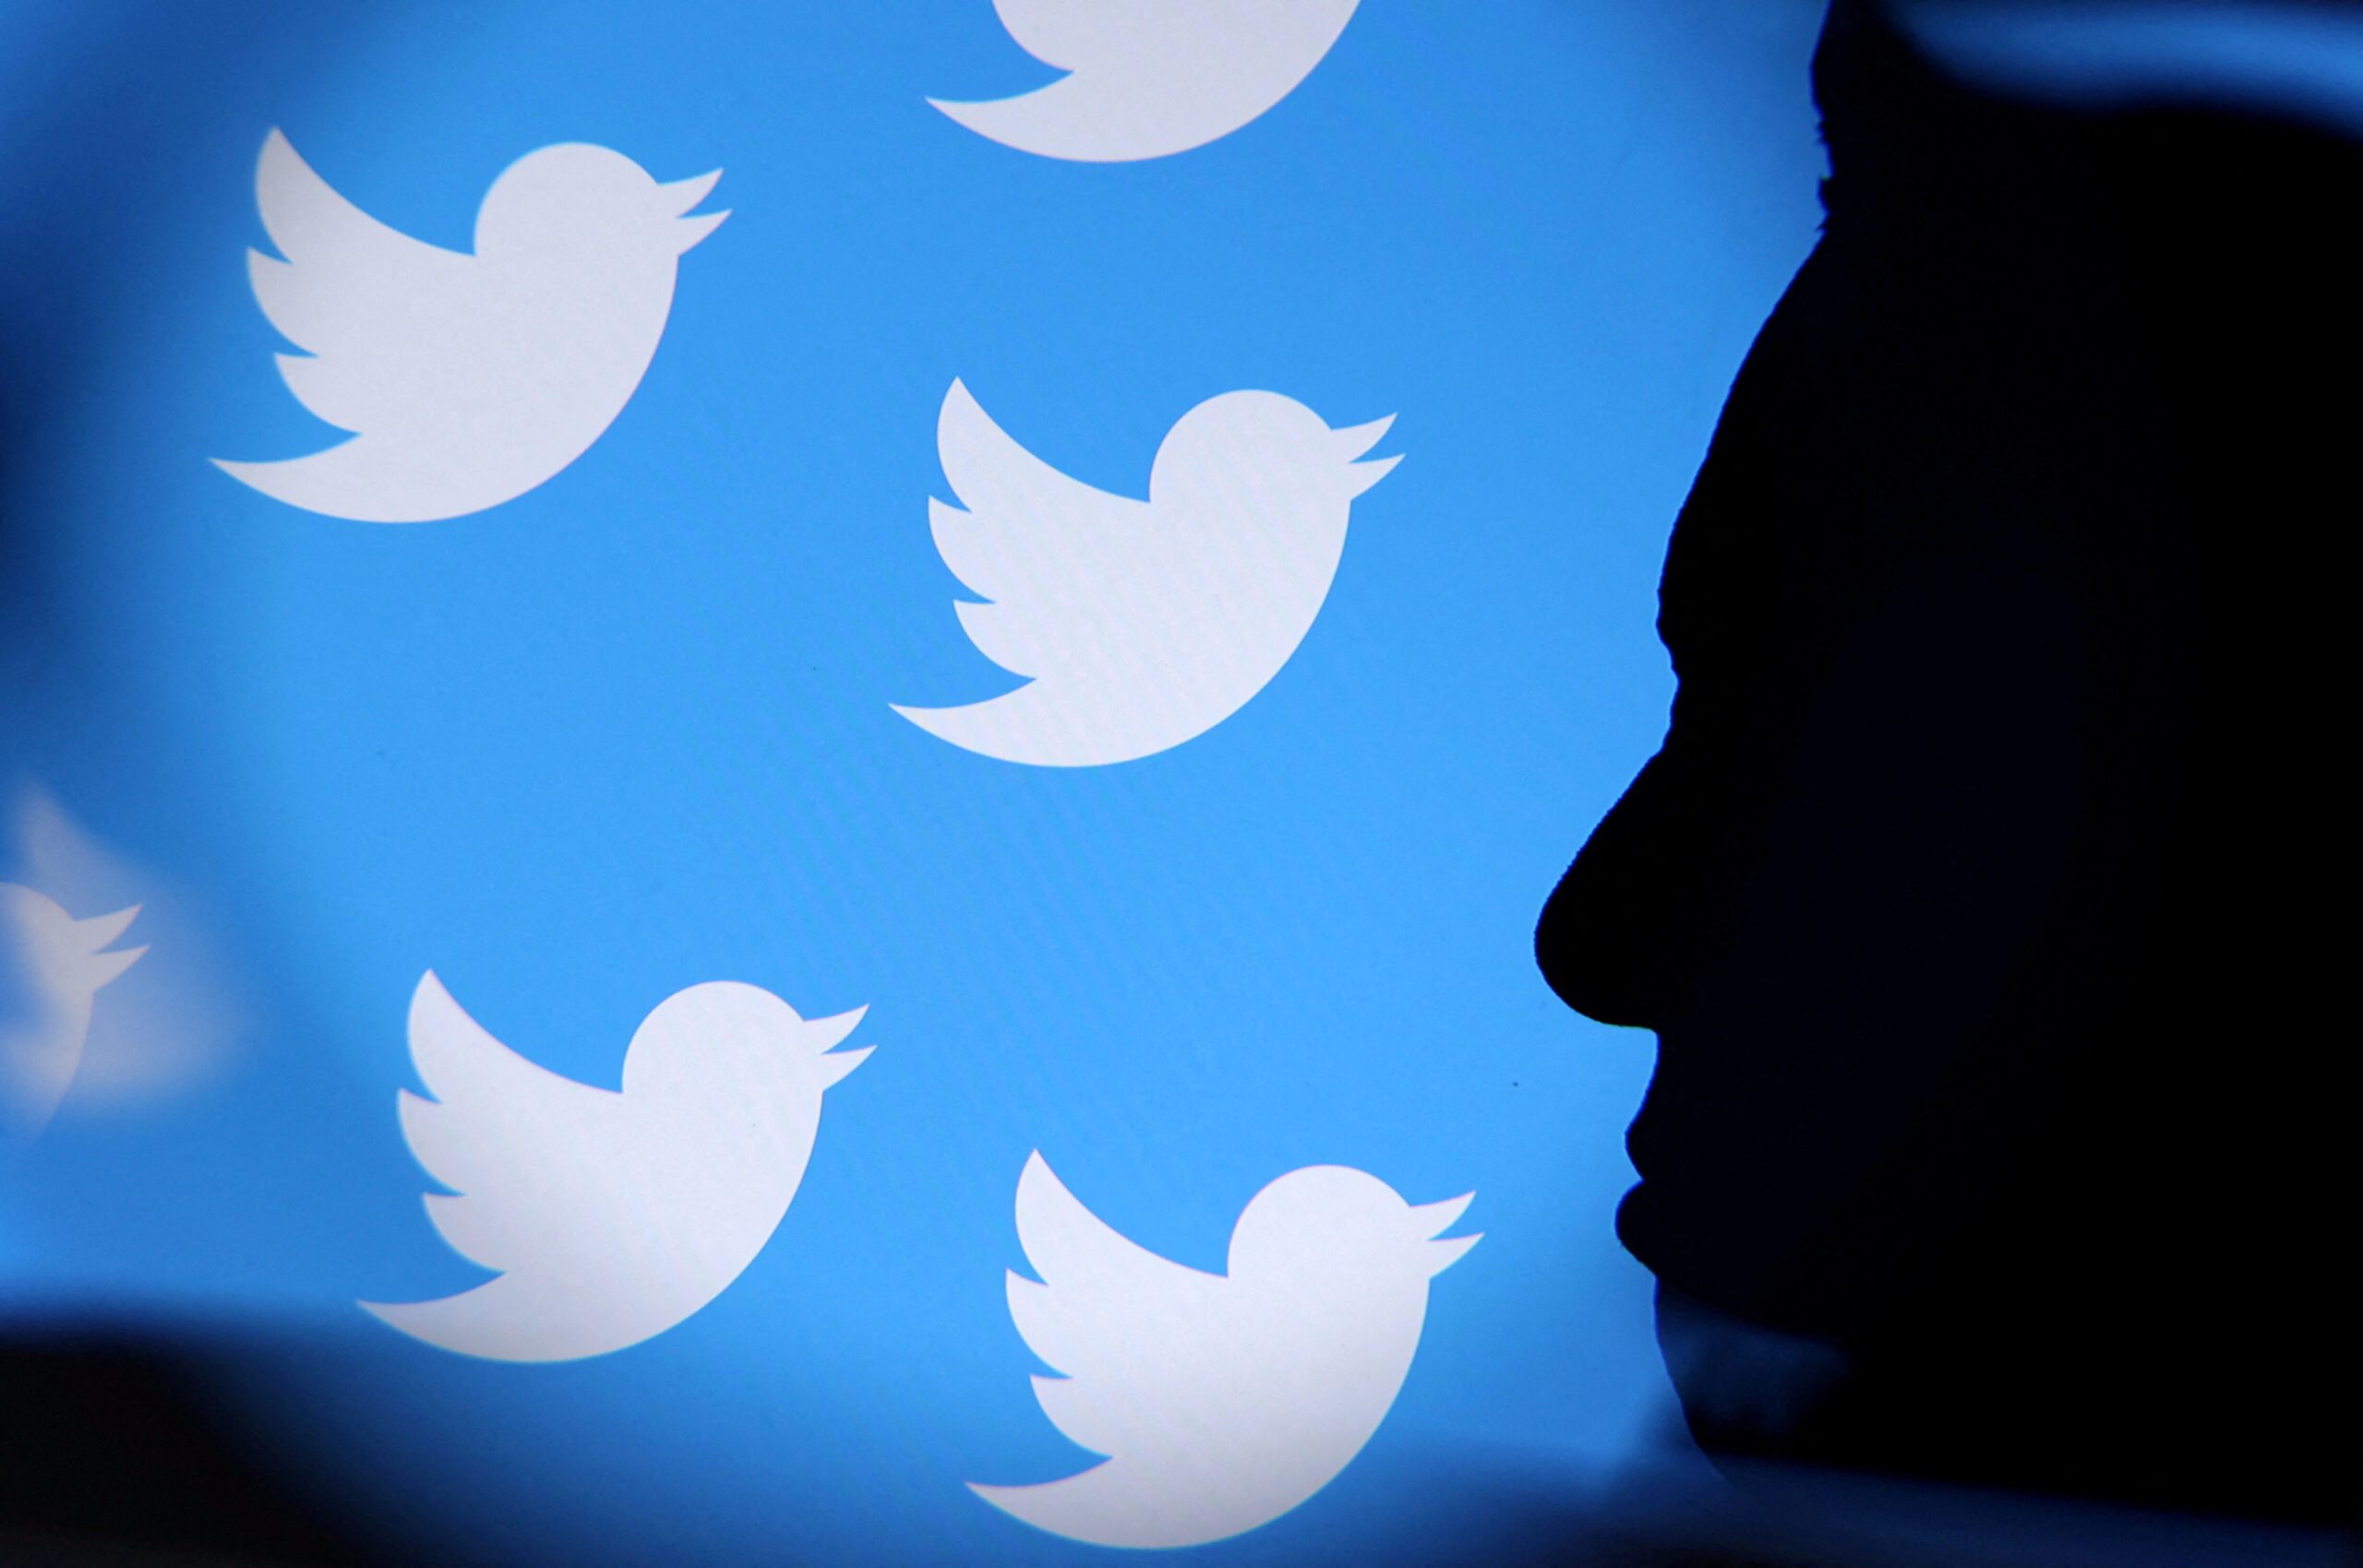 Twitter executives could face big FTC fines – former officials